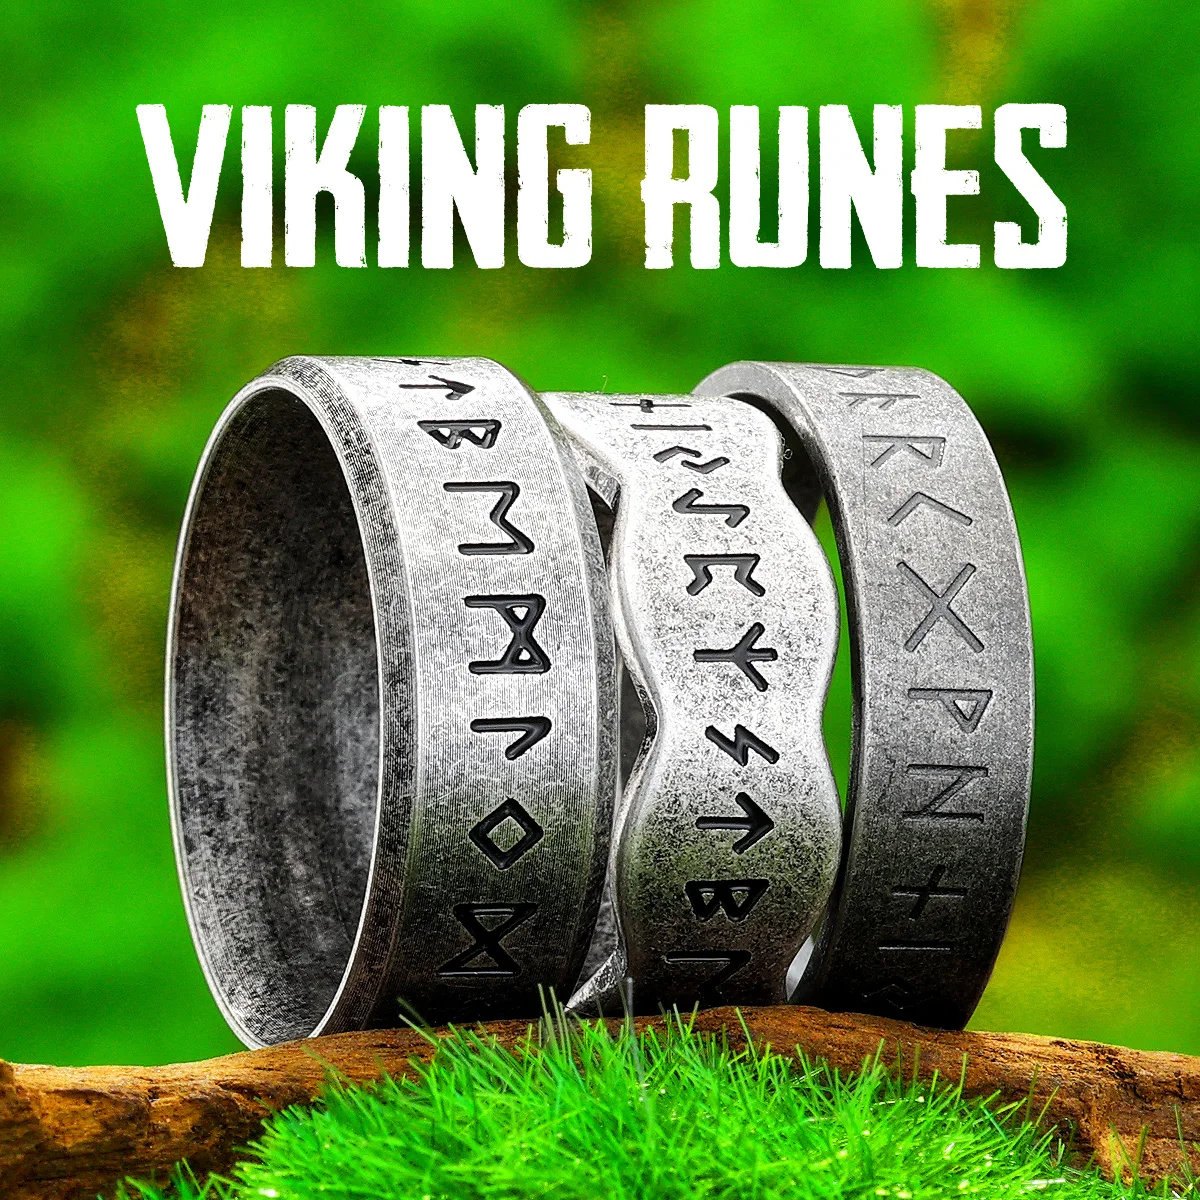 

Vintage Viking Runes Men Rings Stainless Steel Jewelry Punk Rock Futhark Cool Stuff Fashion Accessories For Women Gift Wholesale